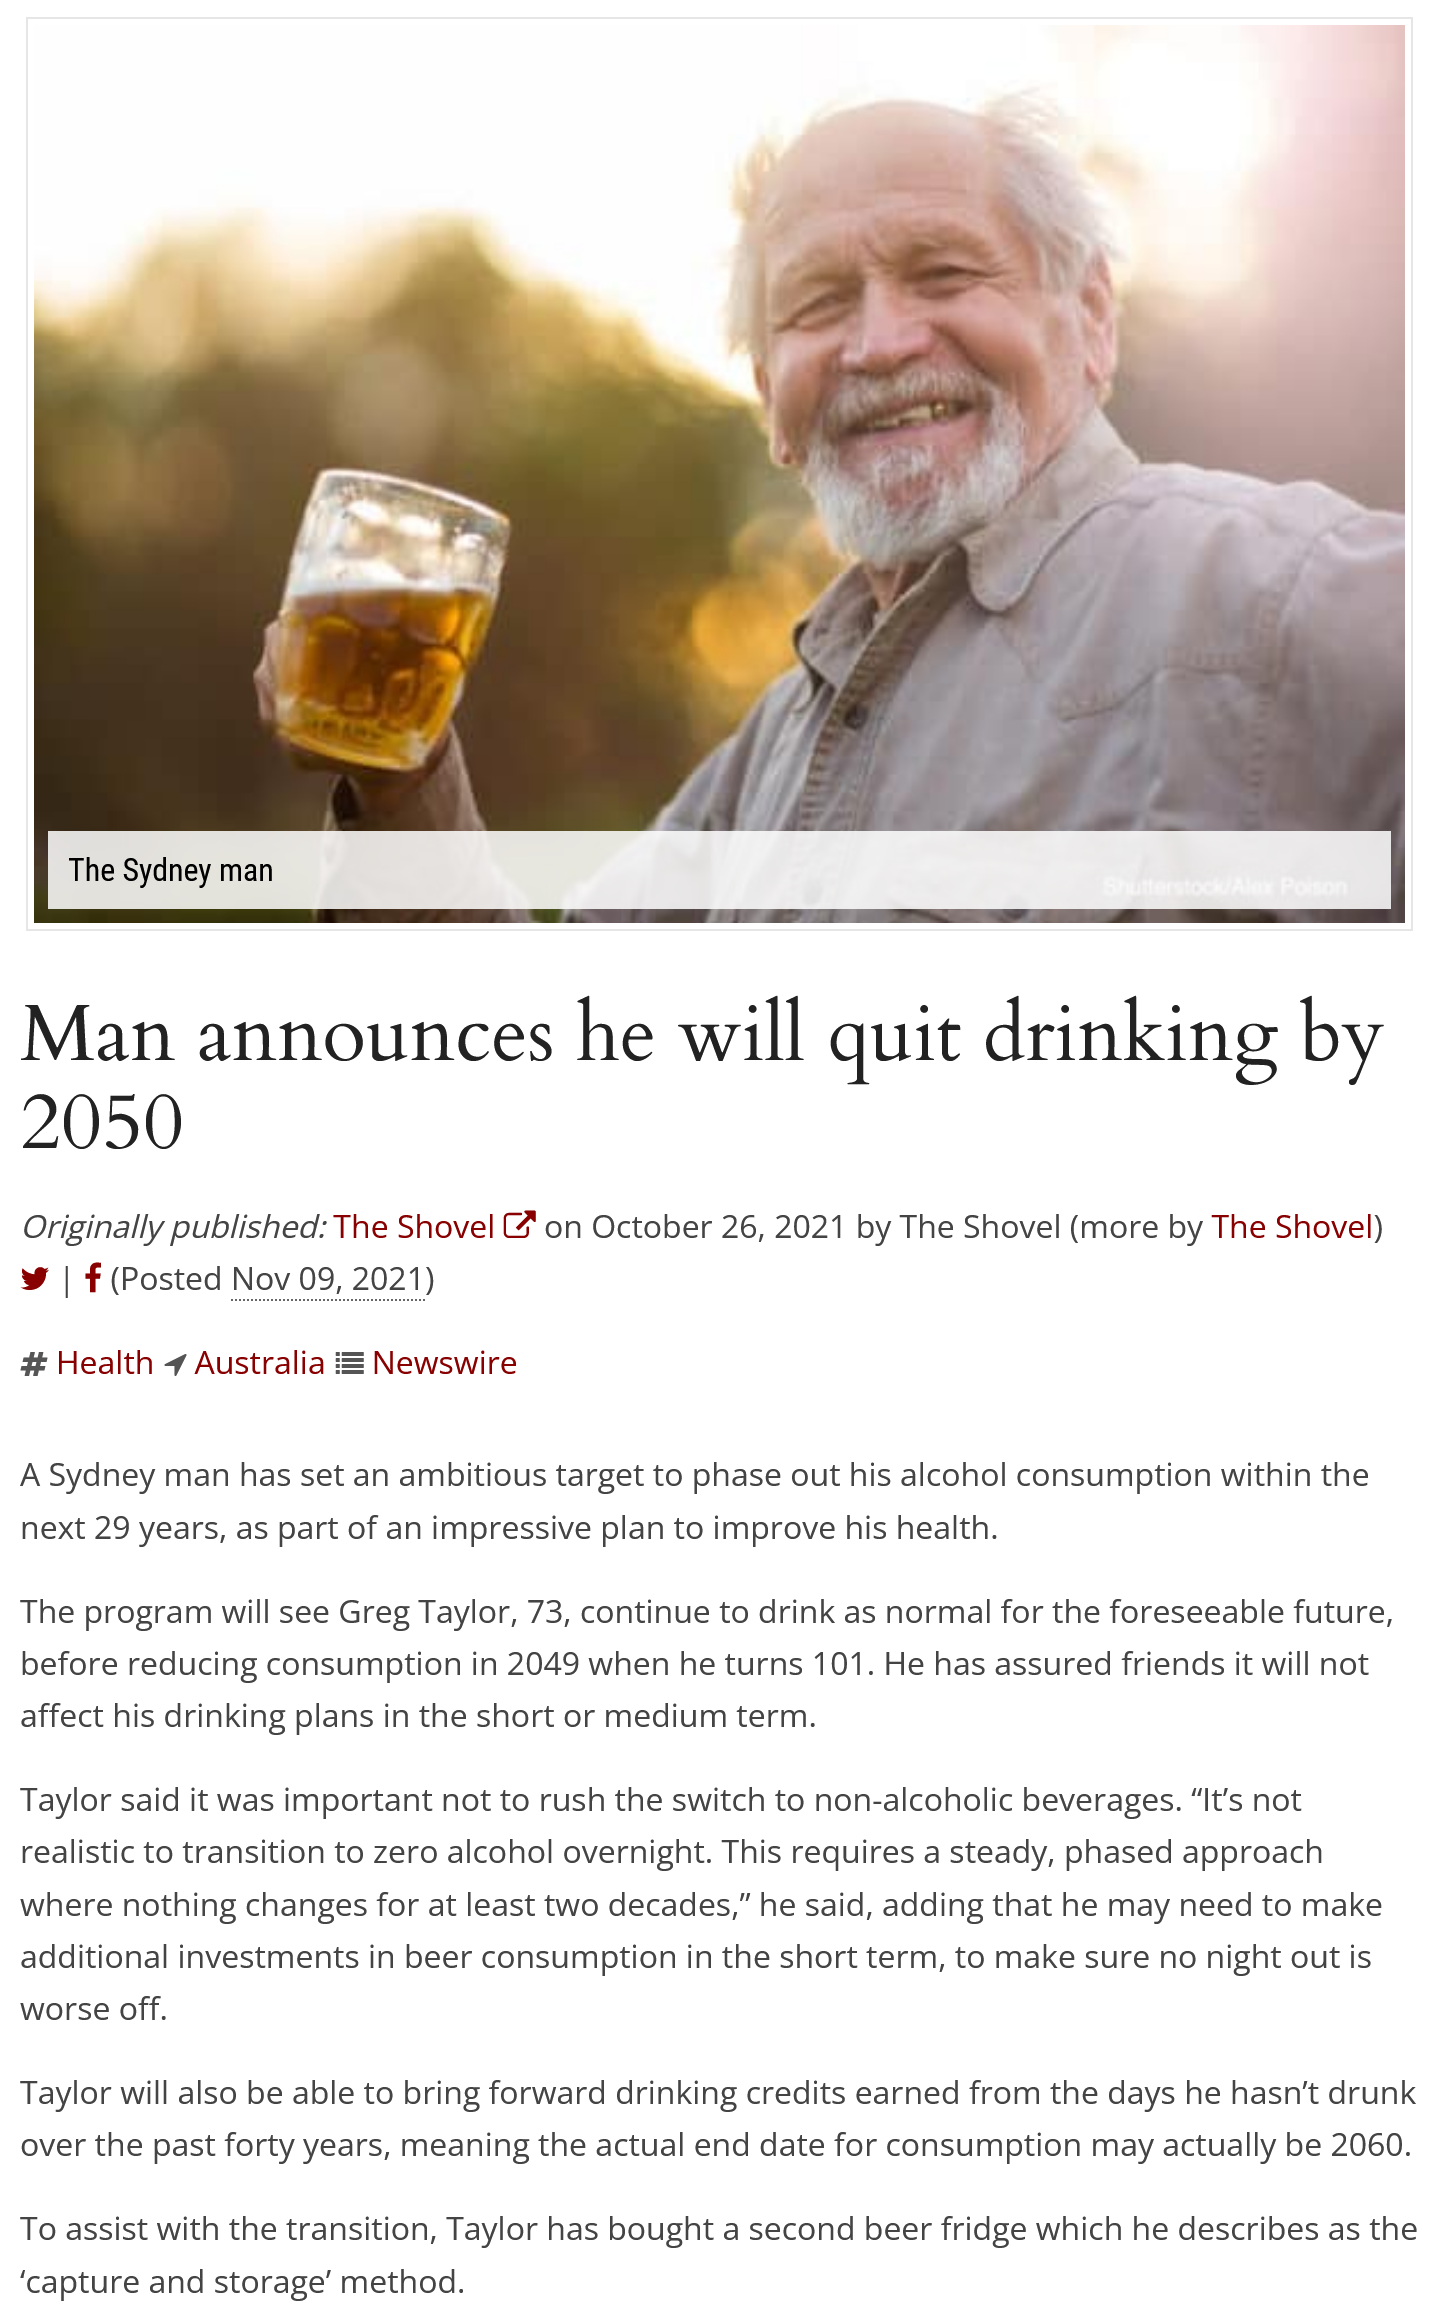 Screenshot 2022-11-25 at 23-50-28 Man announces he will quit drinking by 2050 MR Online.png